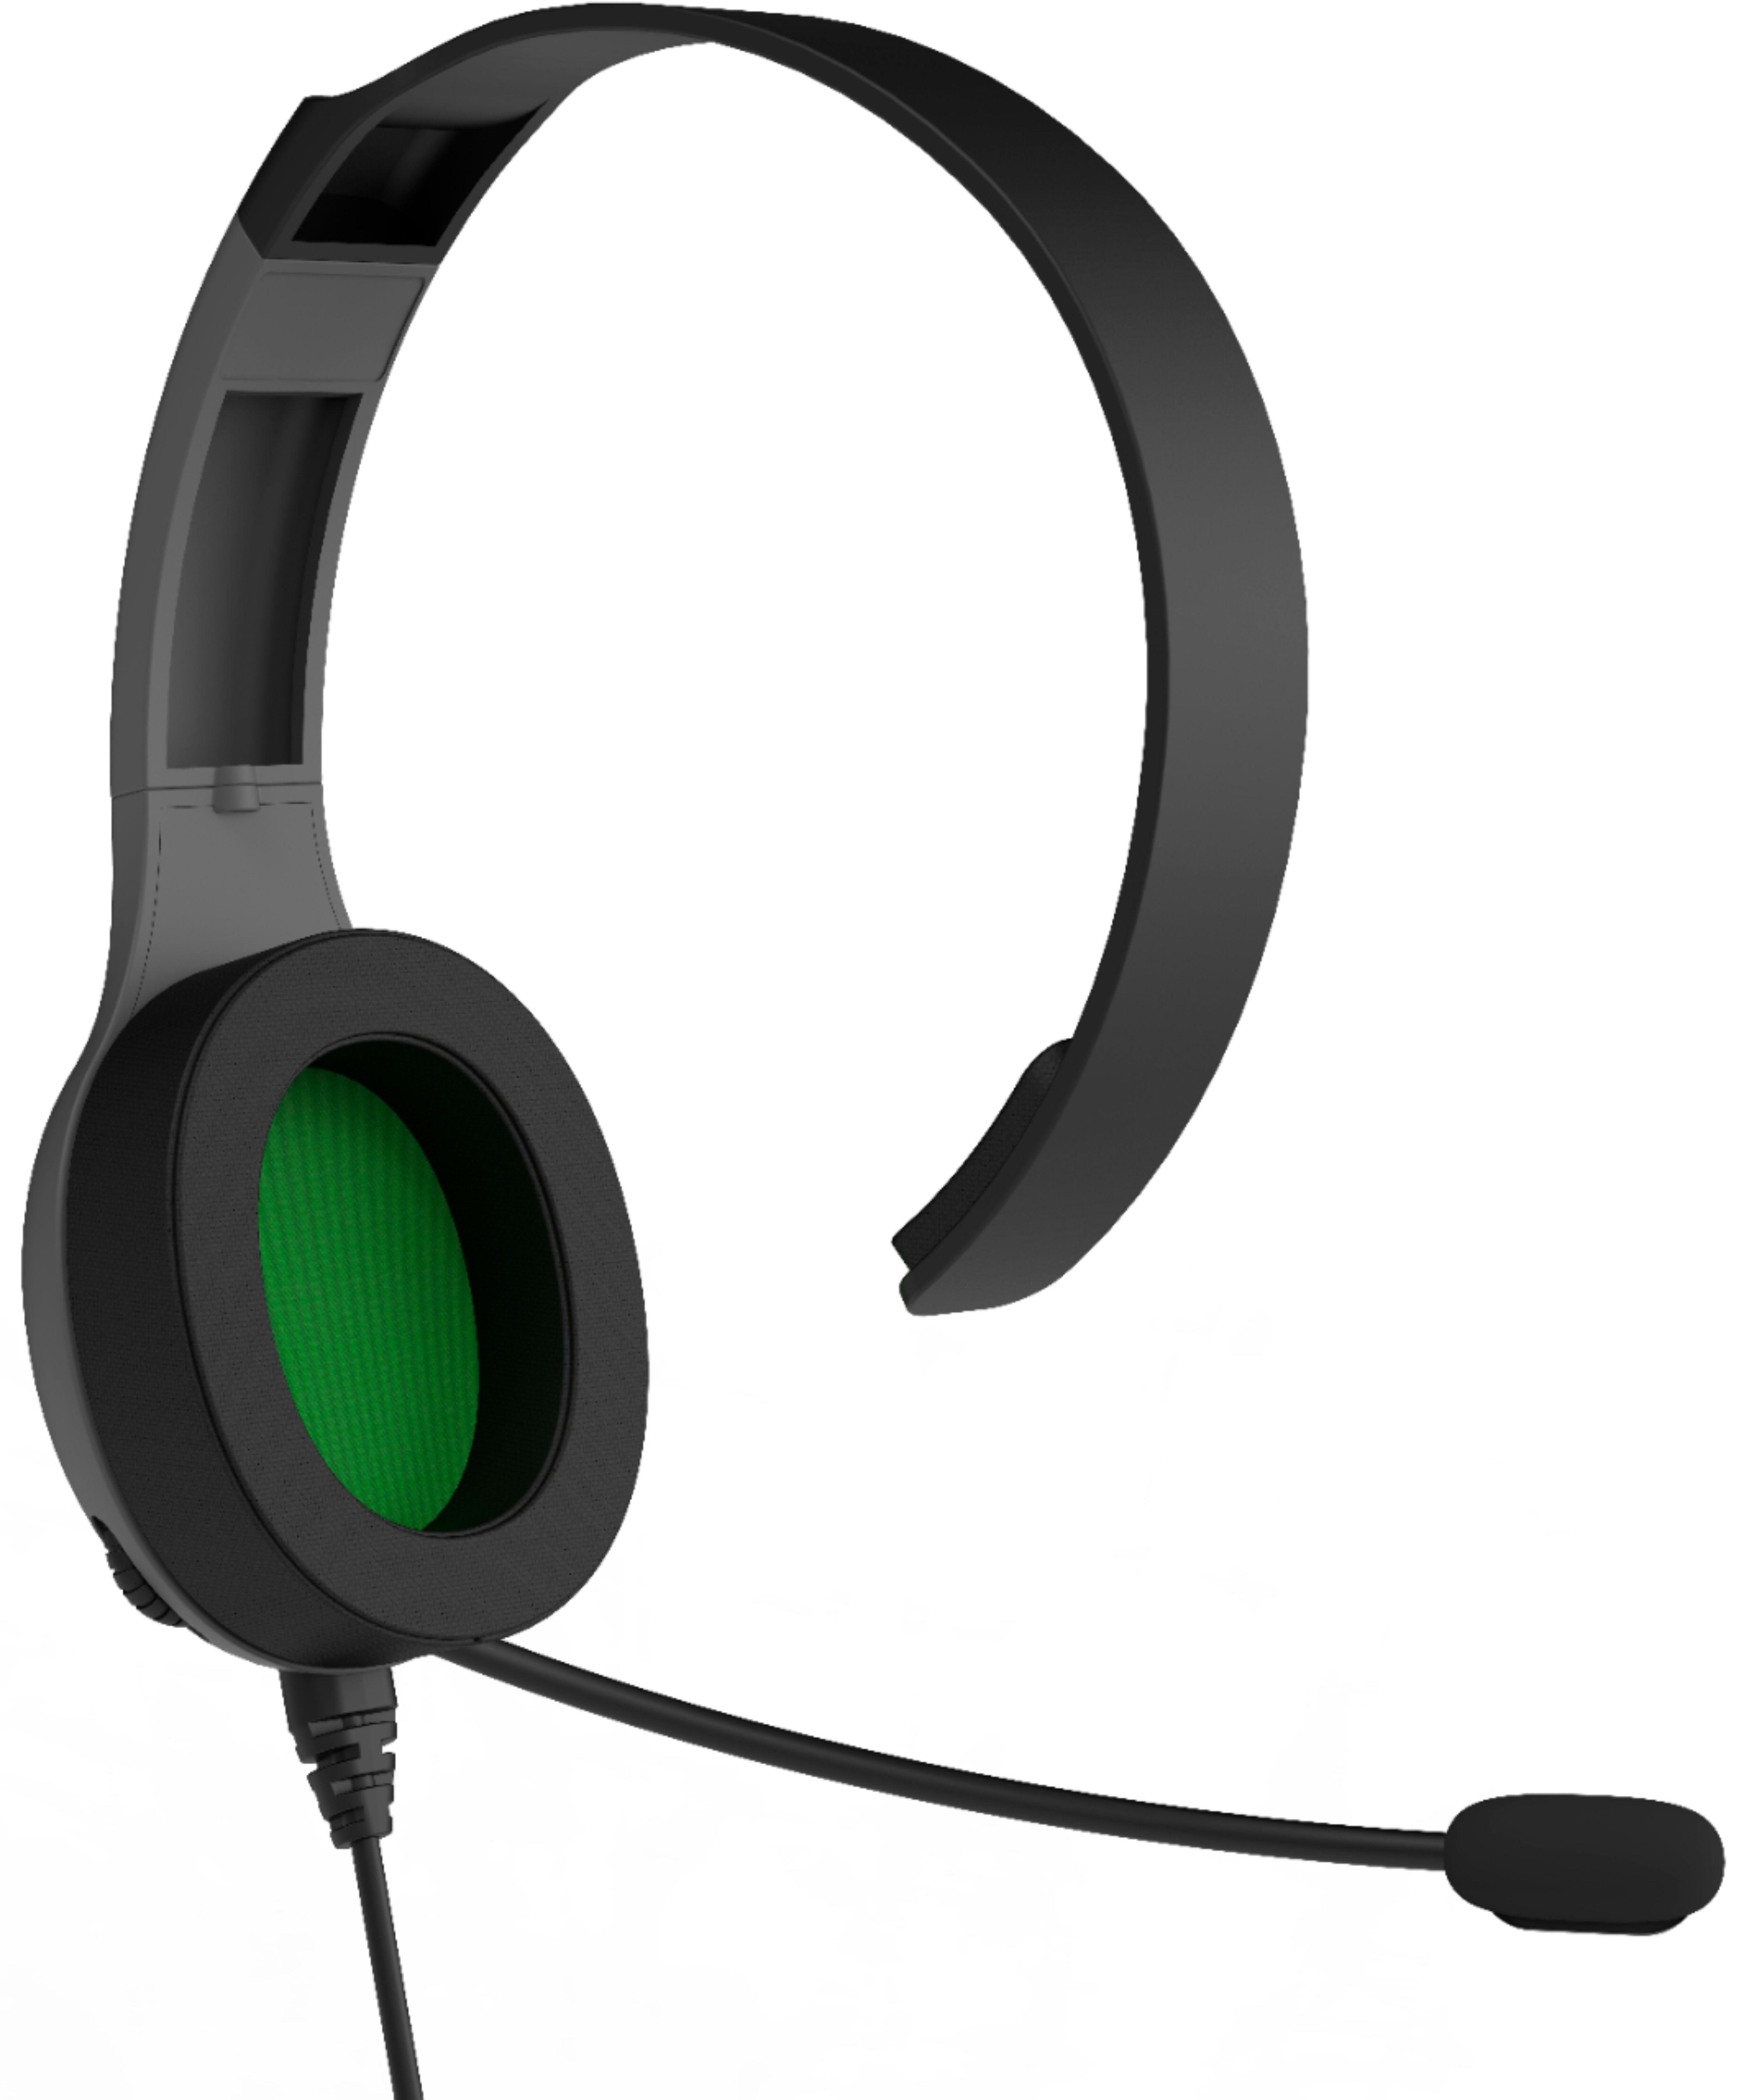 UNBOXING and First Look - PDP LvL30 Chat Headset for Xbox One